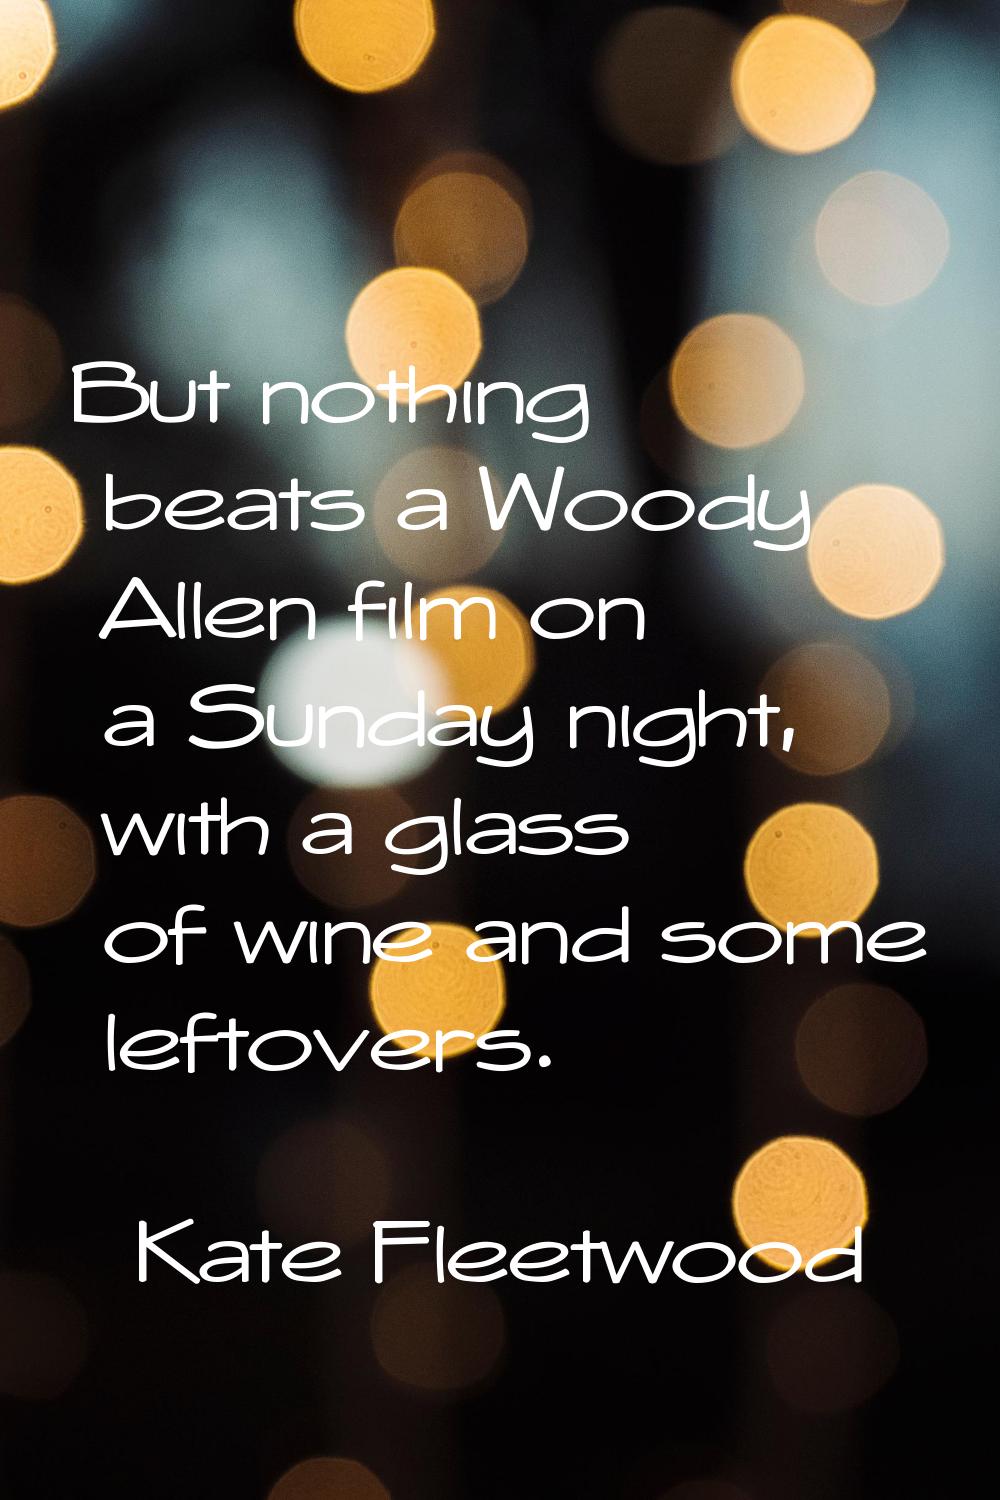 But nothing beats a Woody Allen film on a Sunday night, with a glass of wine and some leftovers.